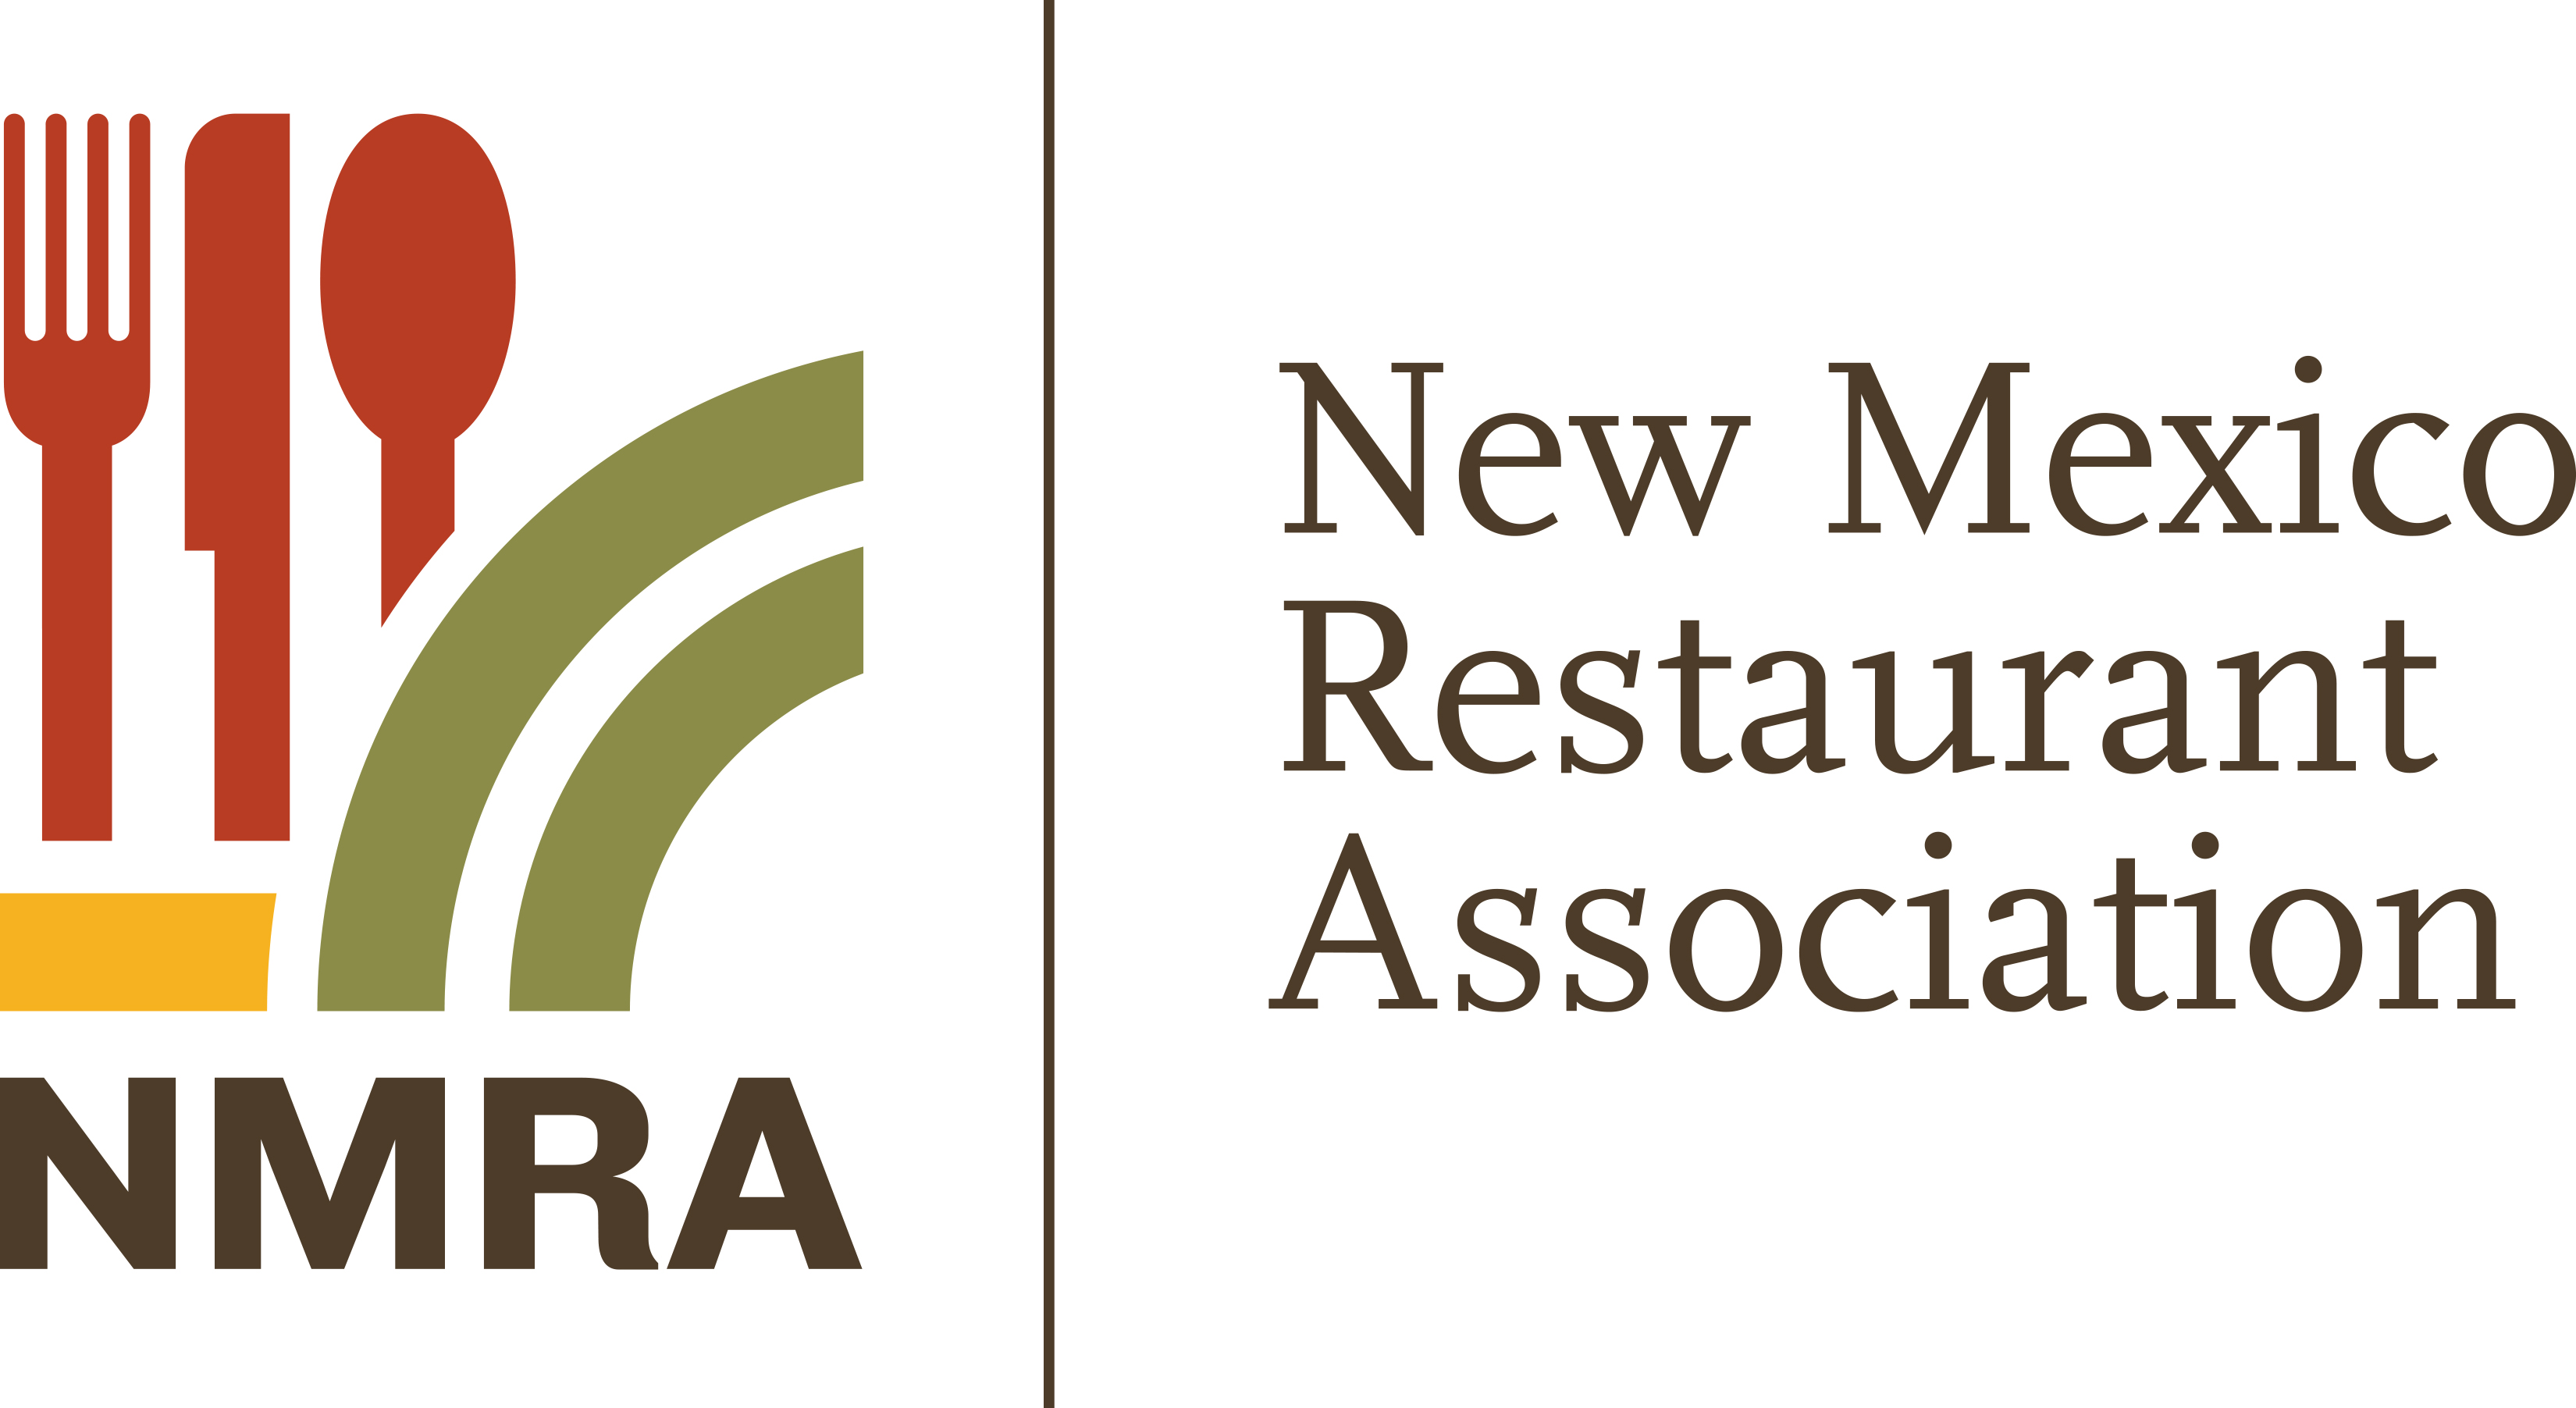 Welcome to New Mexico Restaurant Association